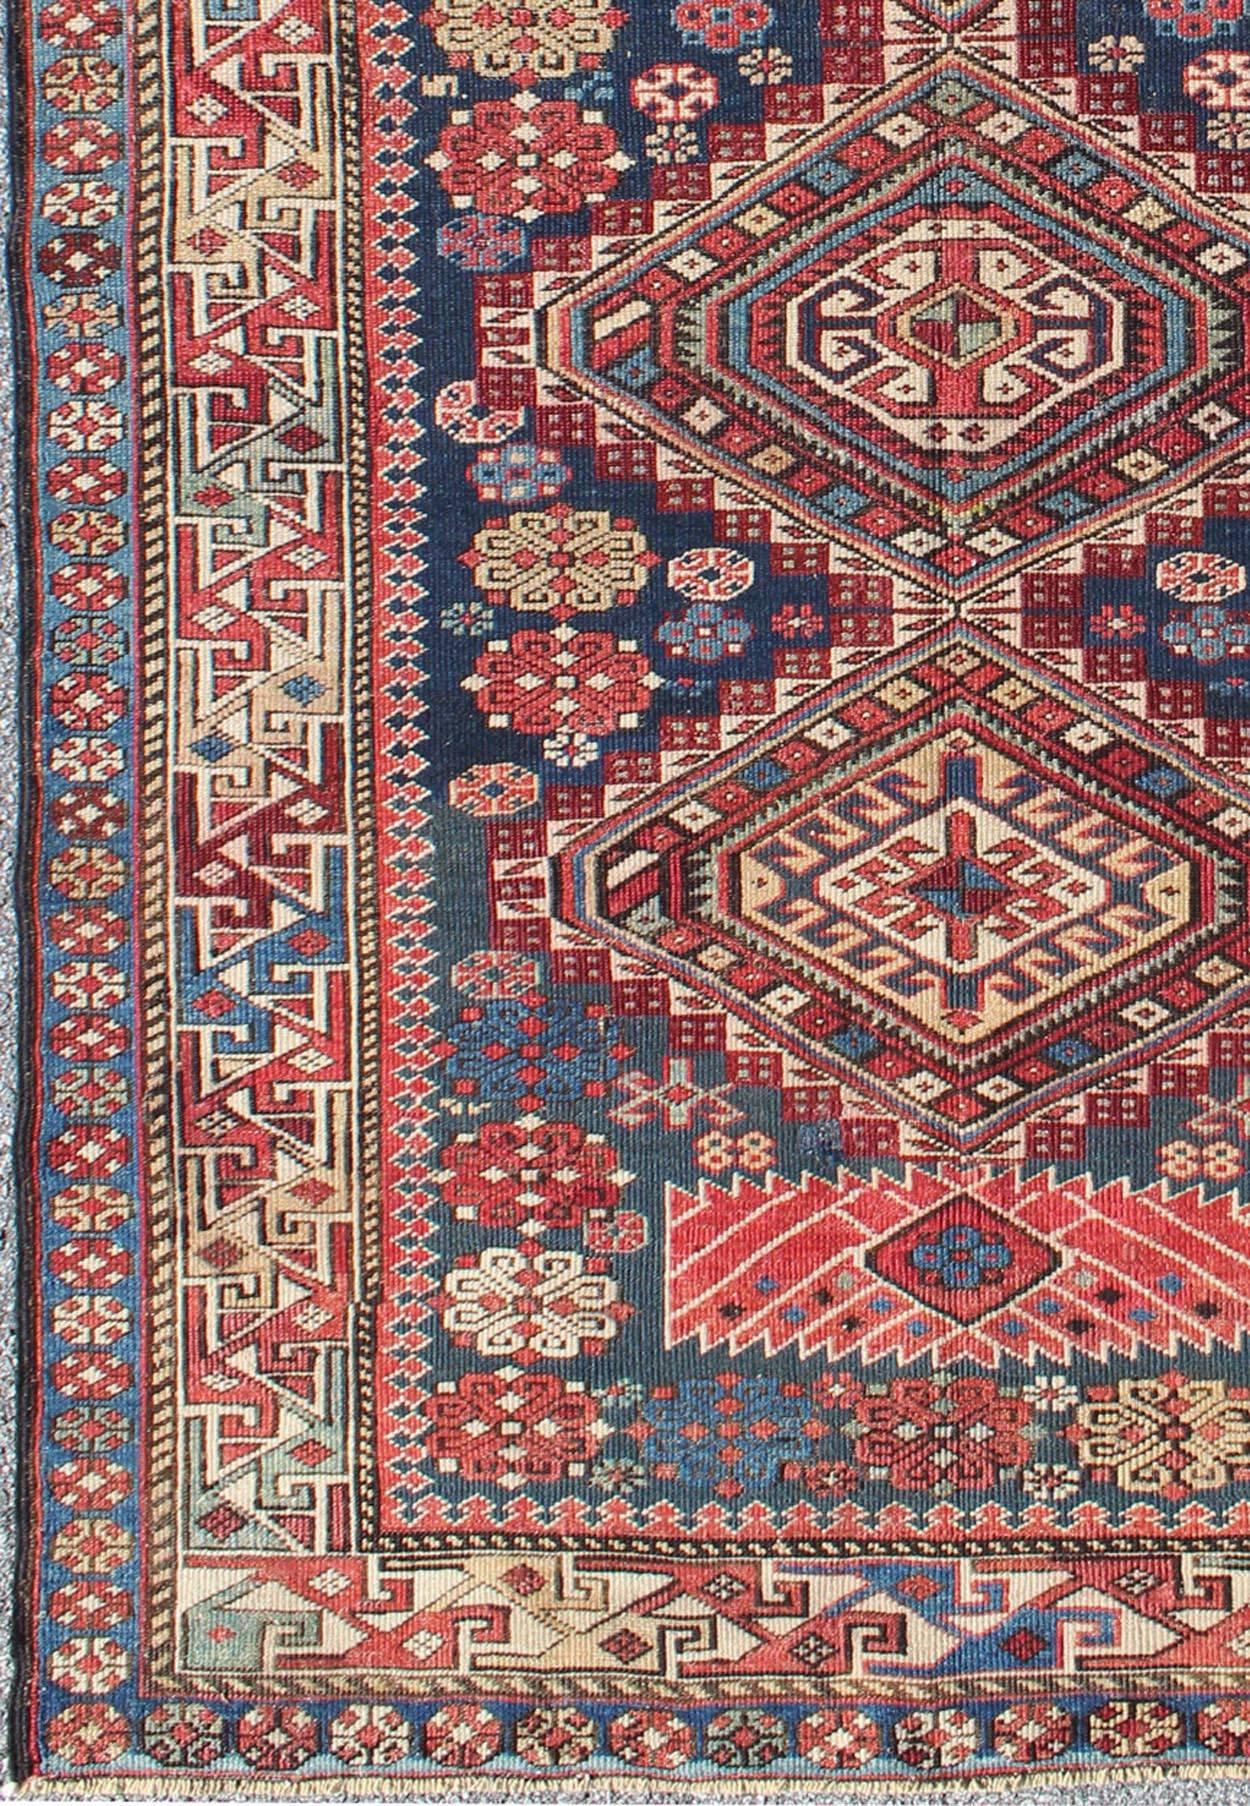 This antique, late 19th century Kazak rug from Russia displays three bold, geometric central medallions set on an indigo background and surrounded by multiple complementary geometric borders.

Measures: 4'4 x 7'7.

Antique Kazak Rug with